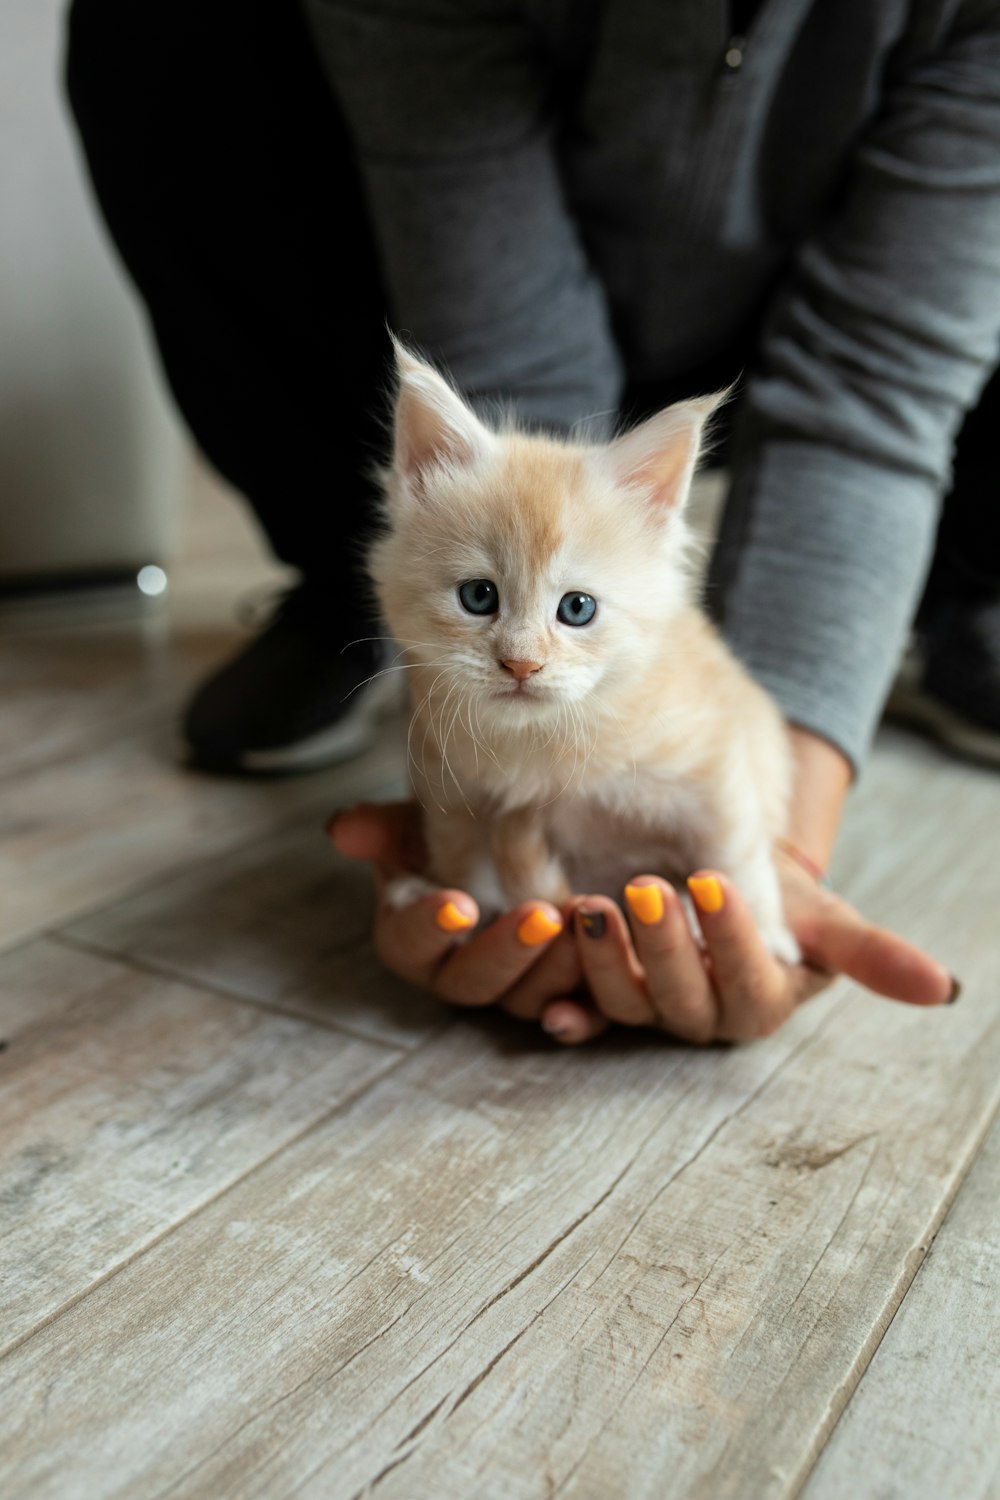 a person holding a small kitten on a wooden floor